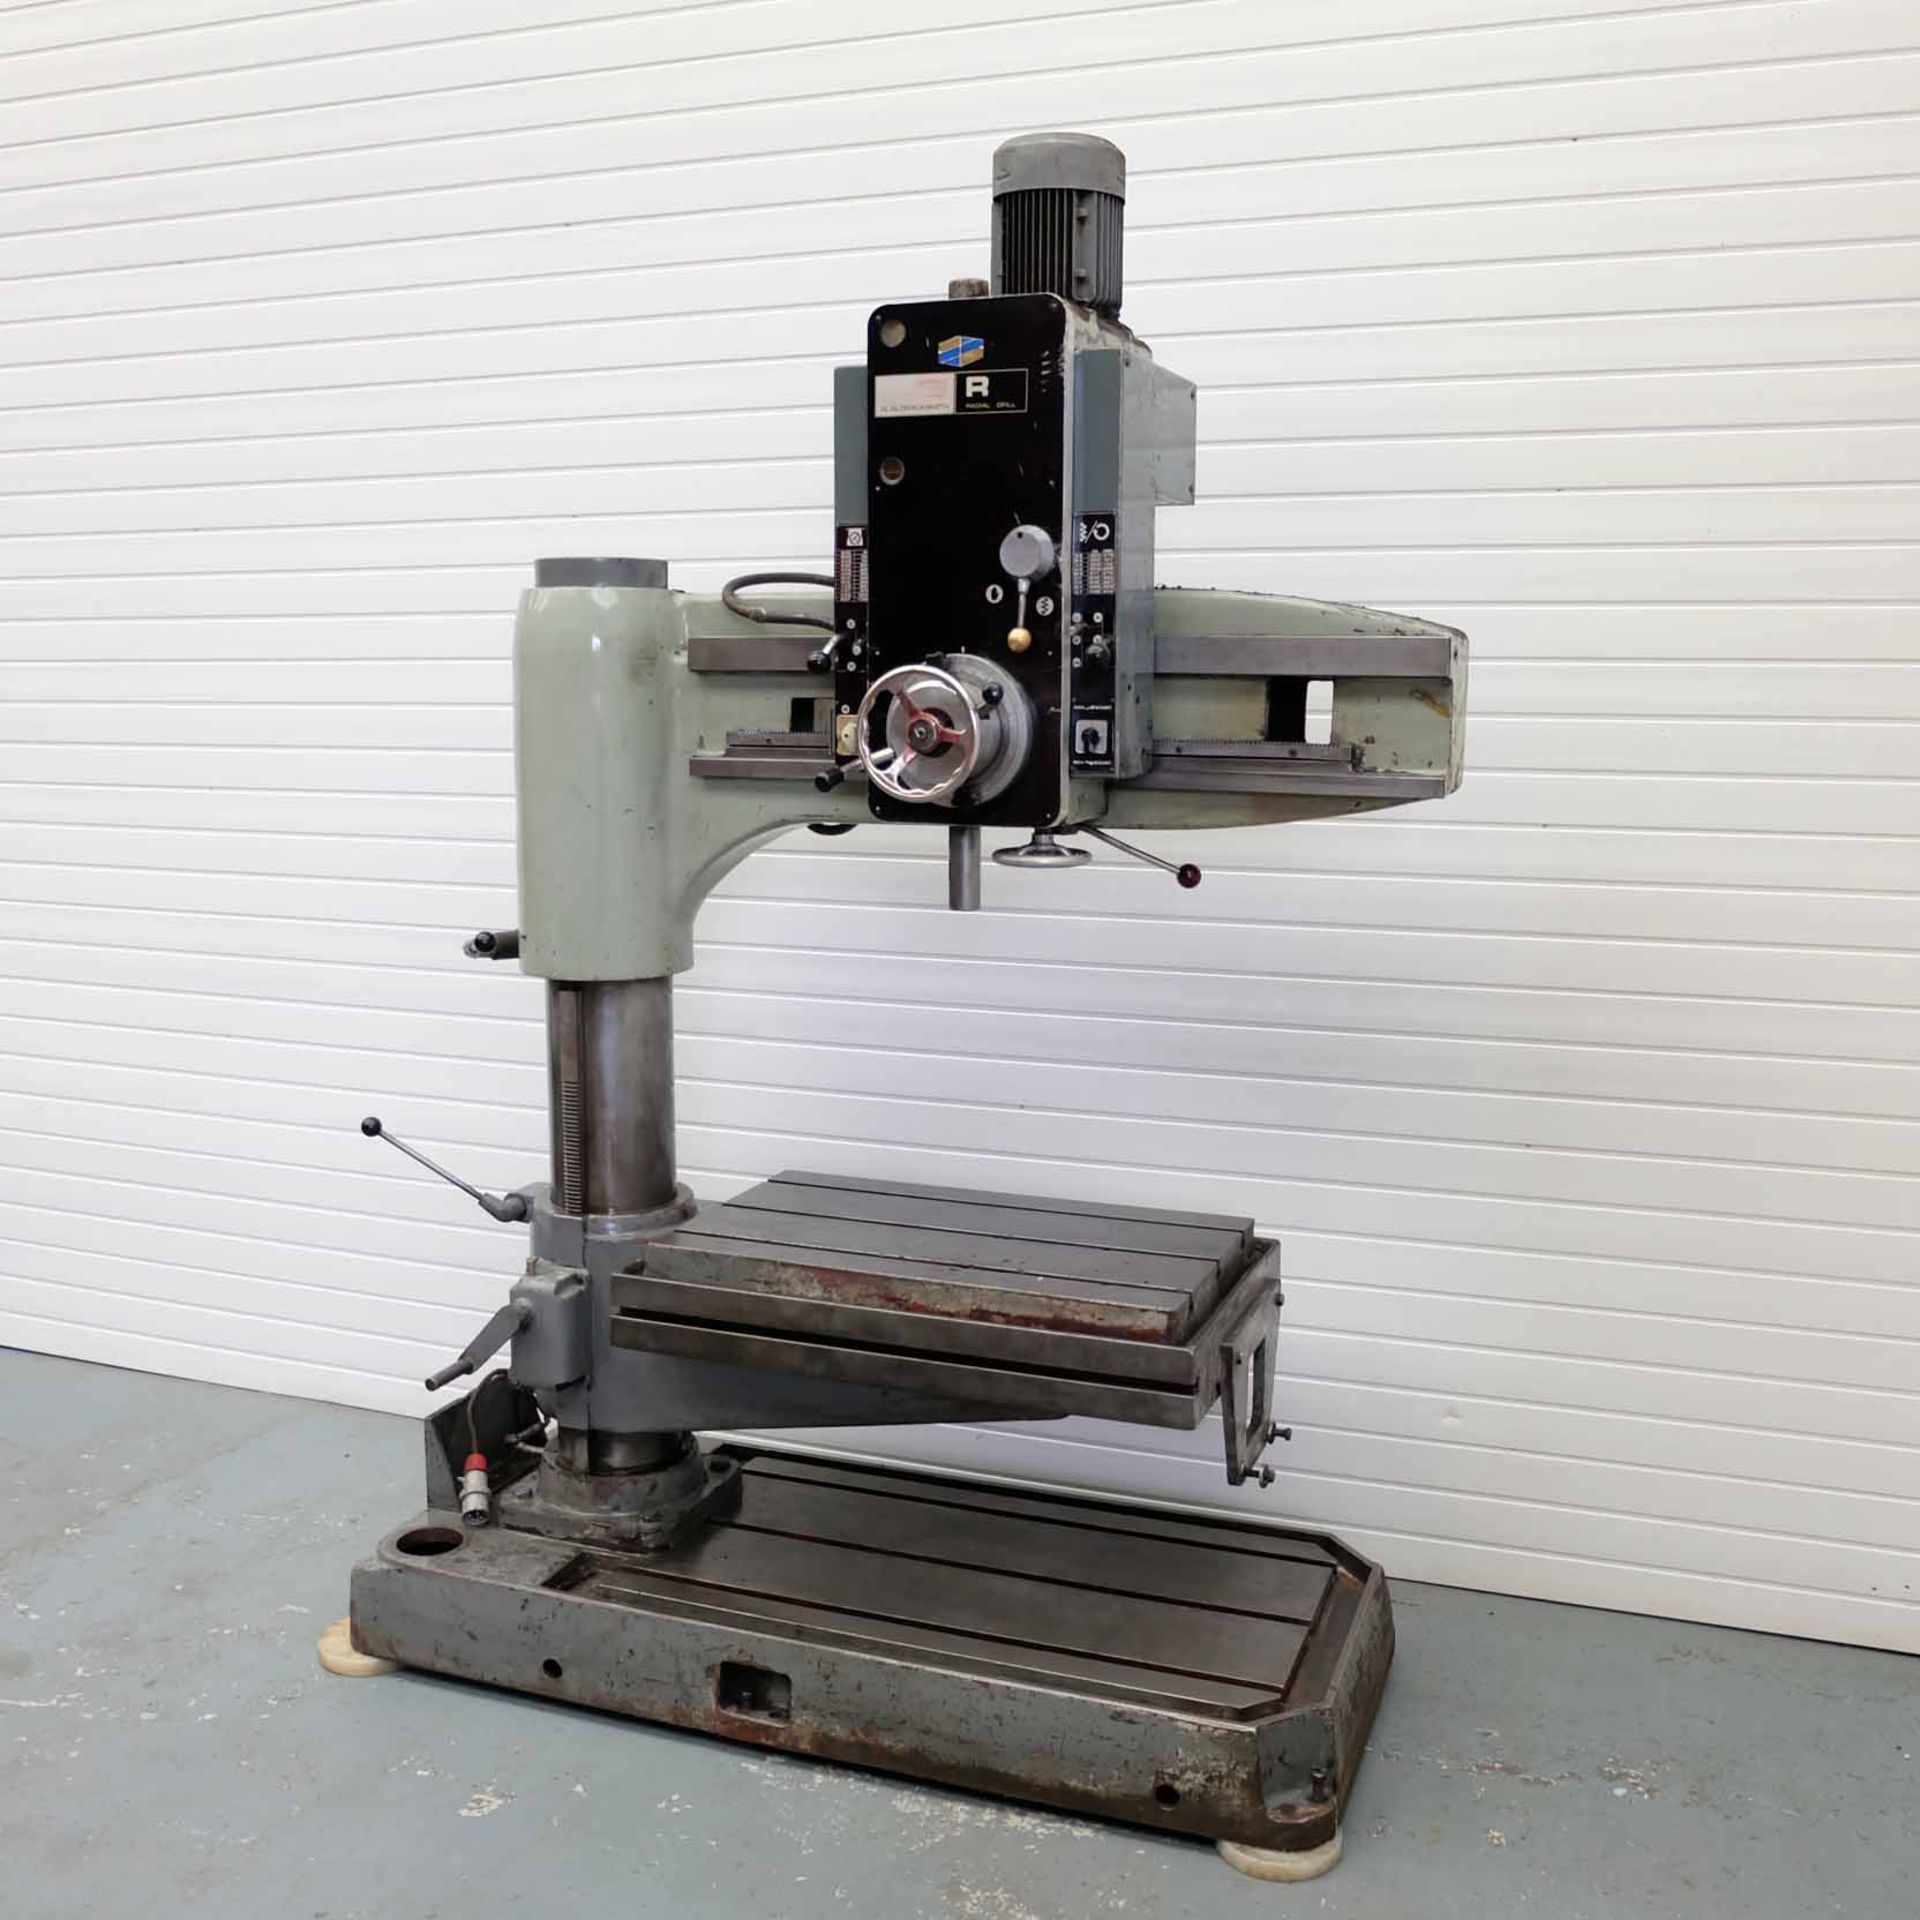 Q&S R4 Radial Arm Drill. Arm Radius 4'. Spindle Size 4MT. Table Size 35 3/4" x 21". Spindle Speeds 6 - Bild 2 aus 11